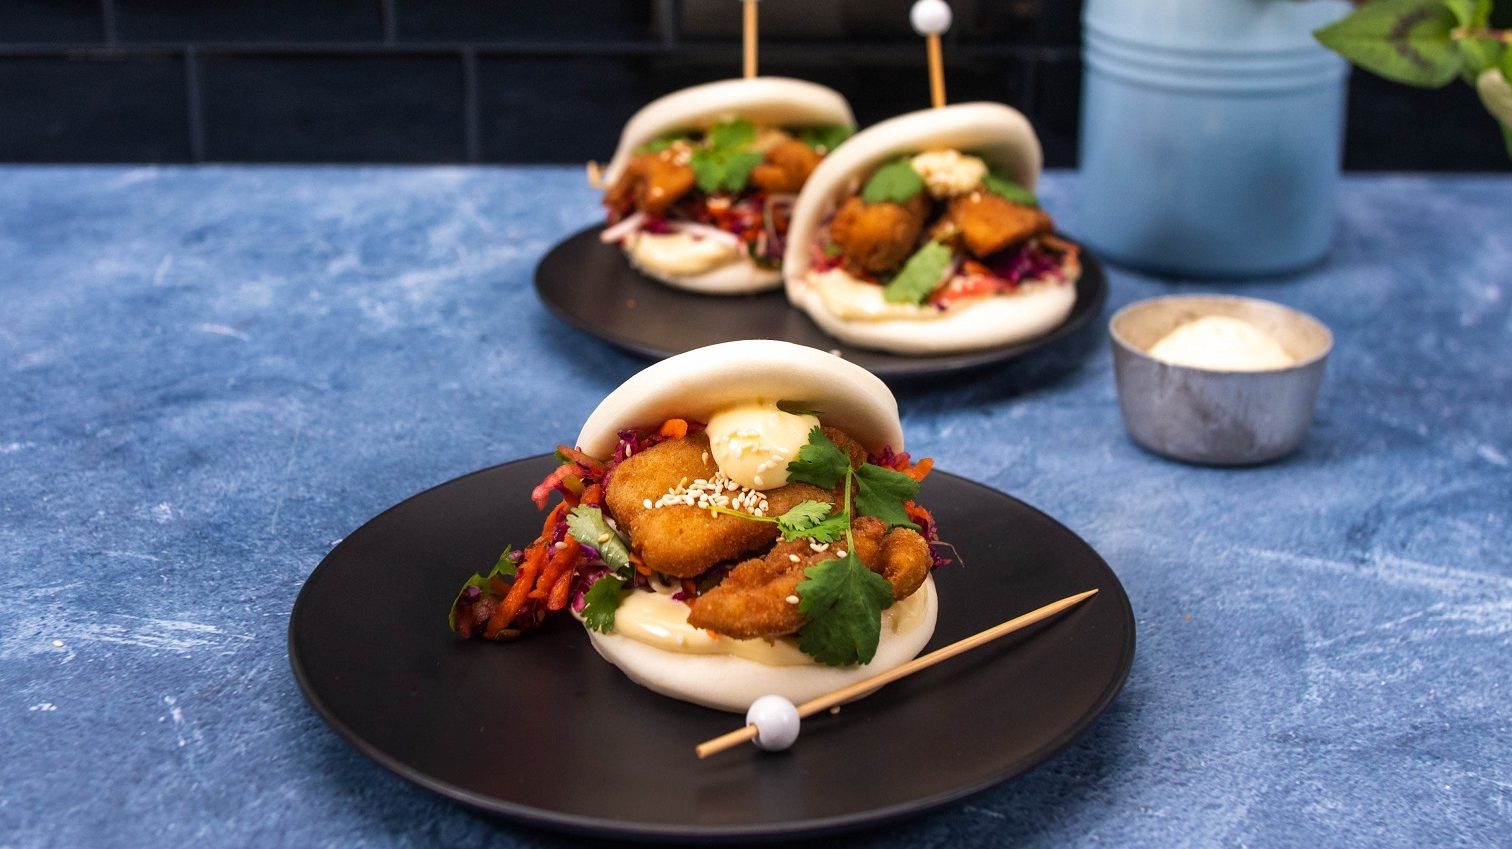 Three chicken karaage bao bun burgers with slaw and herb filling, served on black plates placed on a blue counter.